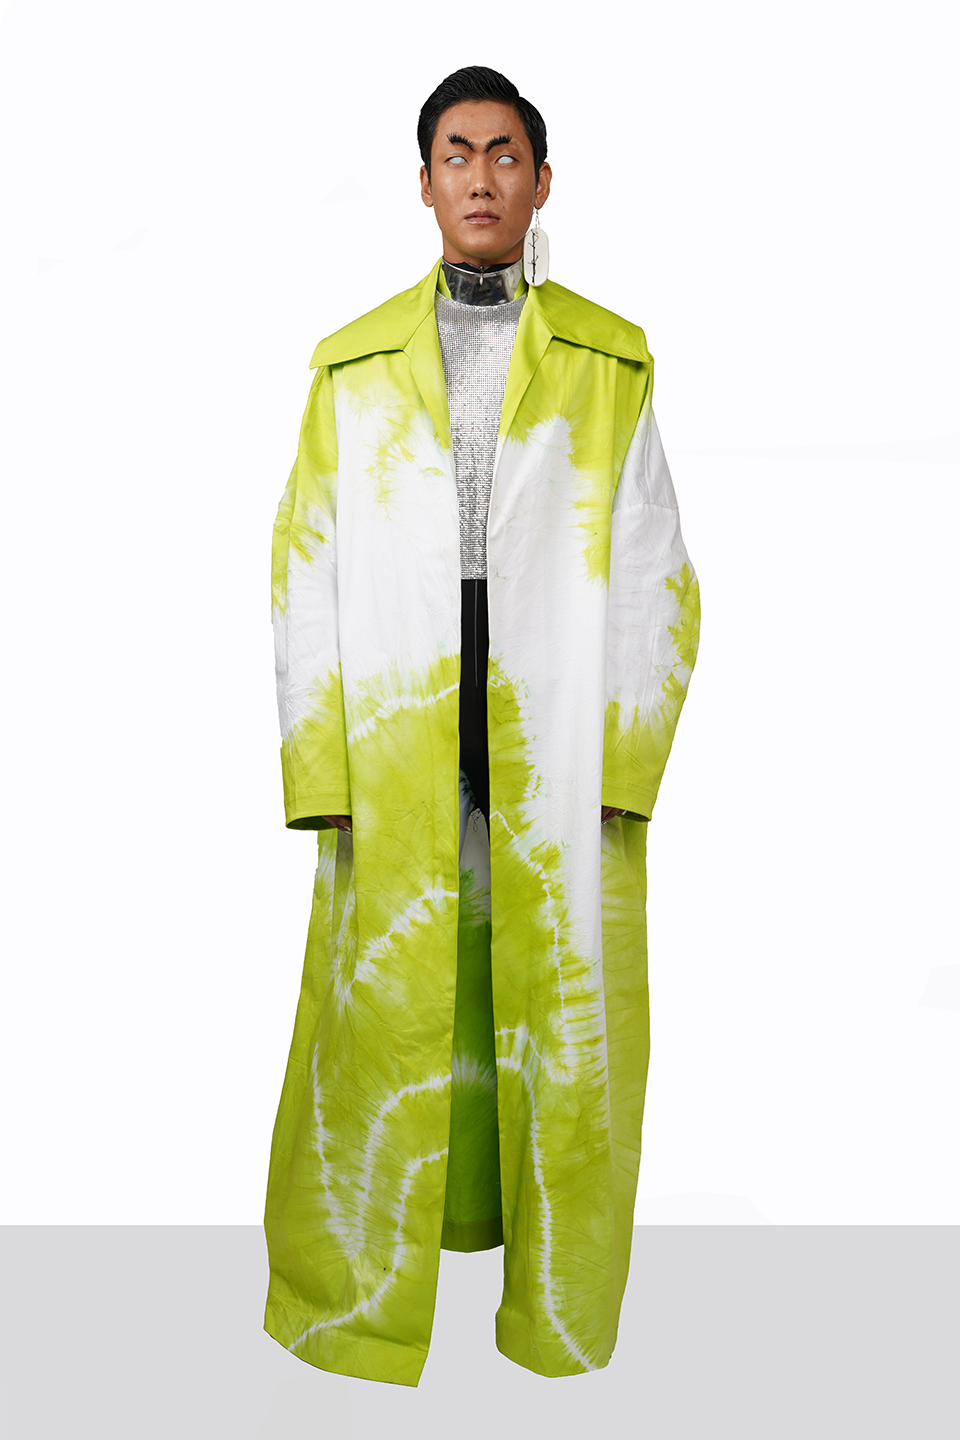 Lime tie-dye on white cotton duster coat